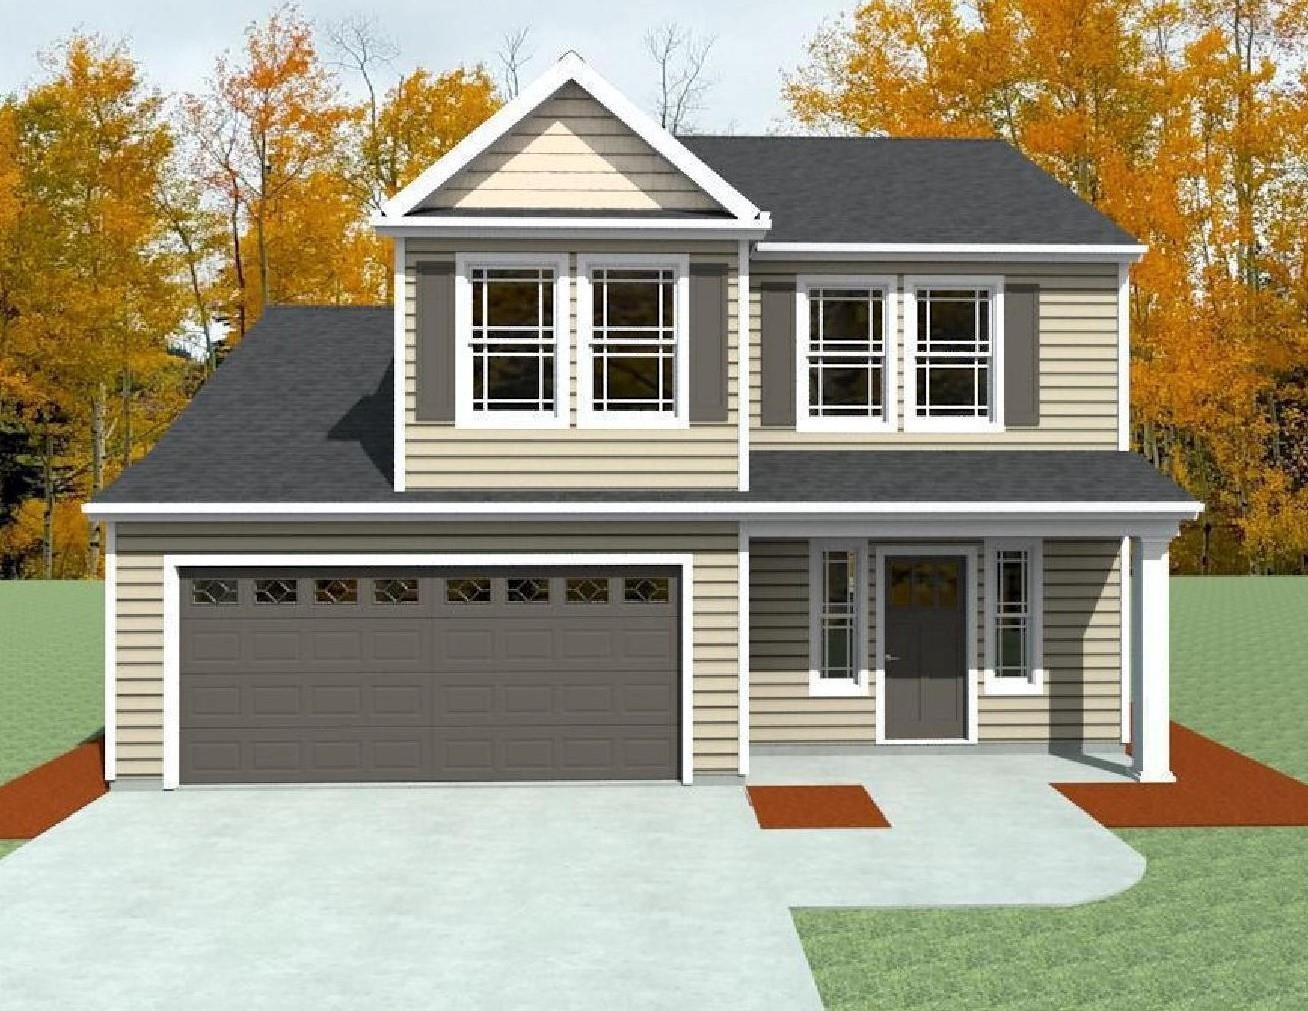 This is the REYNOLDS floorplan, 3 bedrooms 2 1/2 bathrooms, Located in the NEW Elliott park community in Lyman just minutes from Spartanburg and Greenville. Call today for more info!